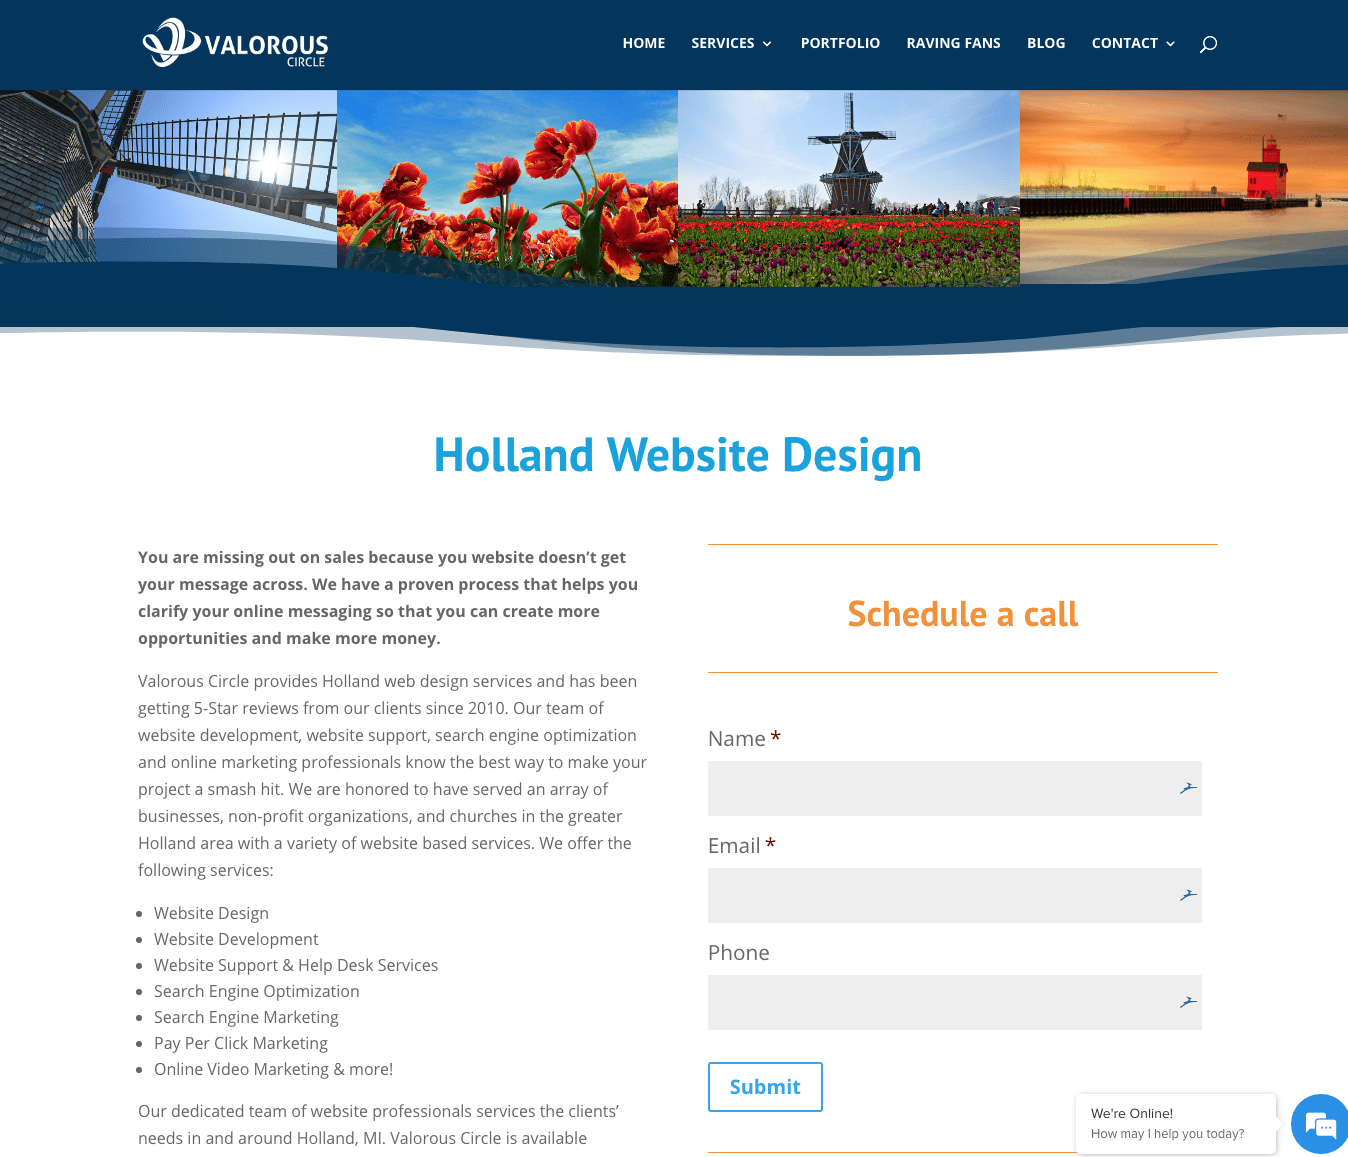 Valorous Circle's holland landing page. Create a landing page using geographic cues.